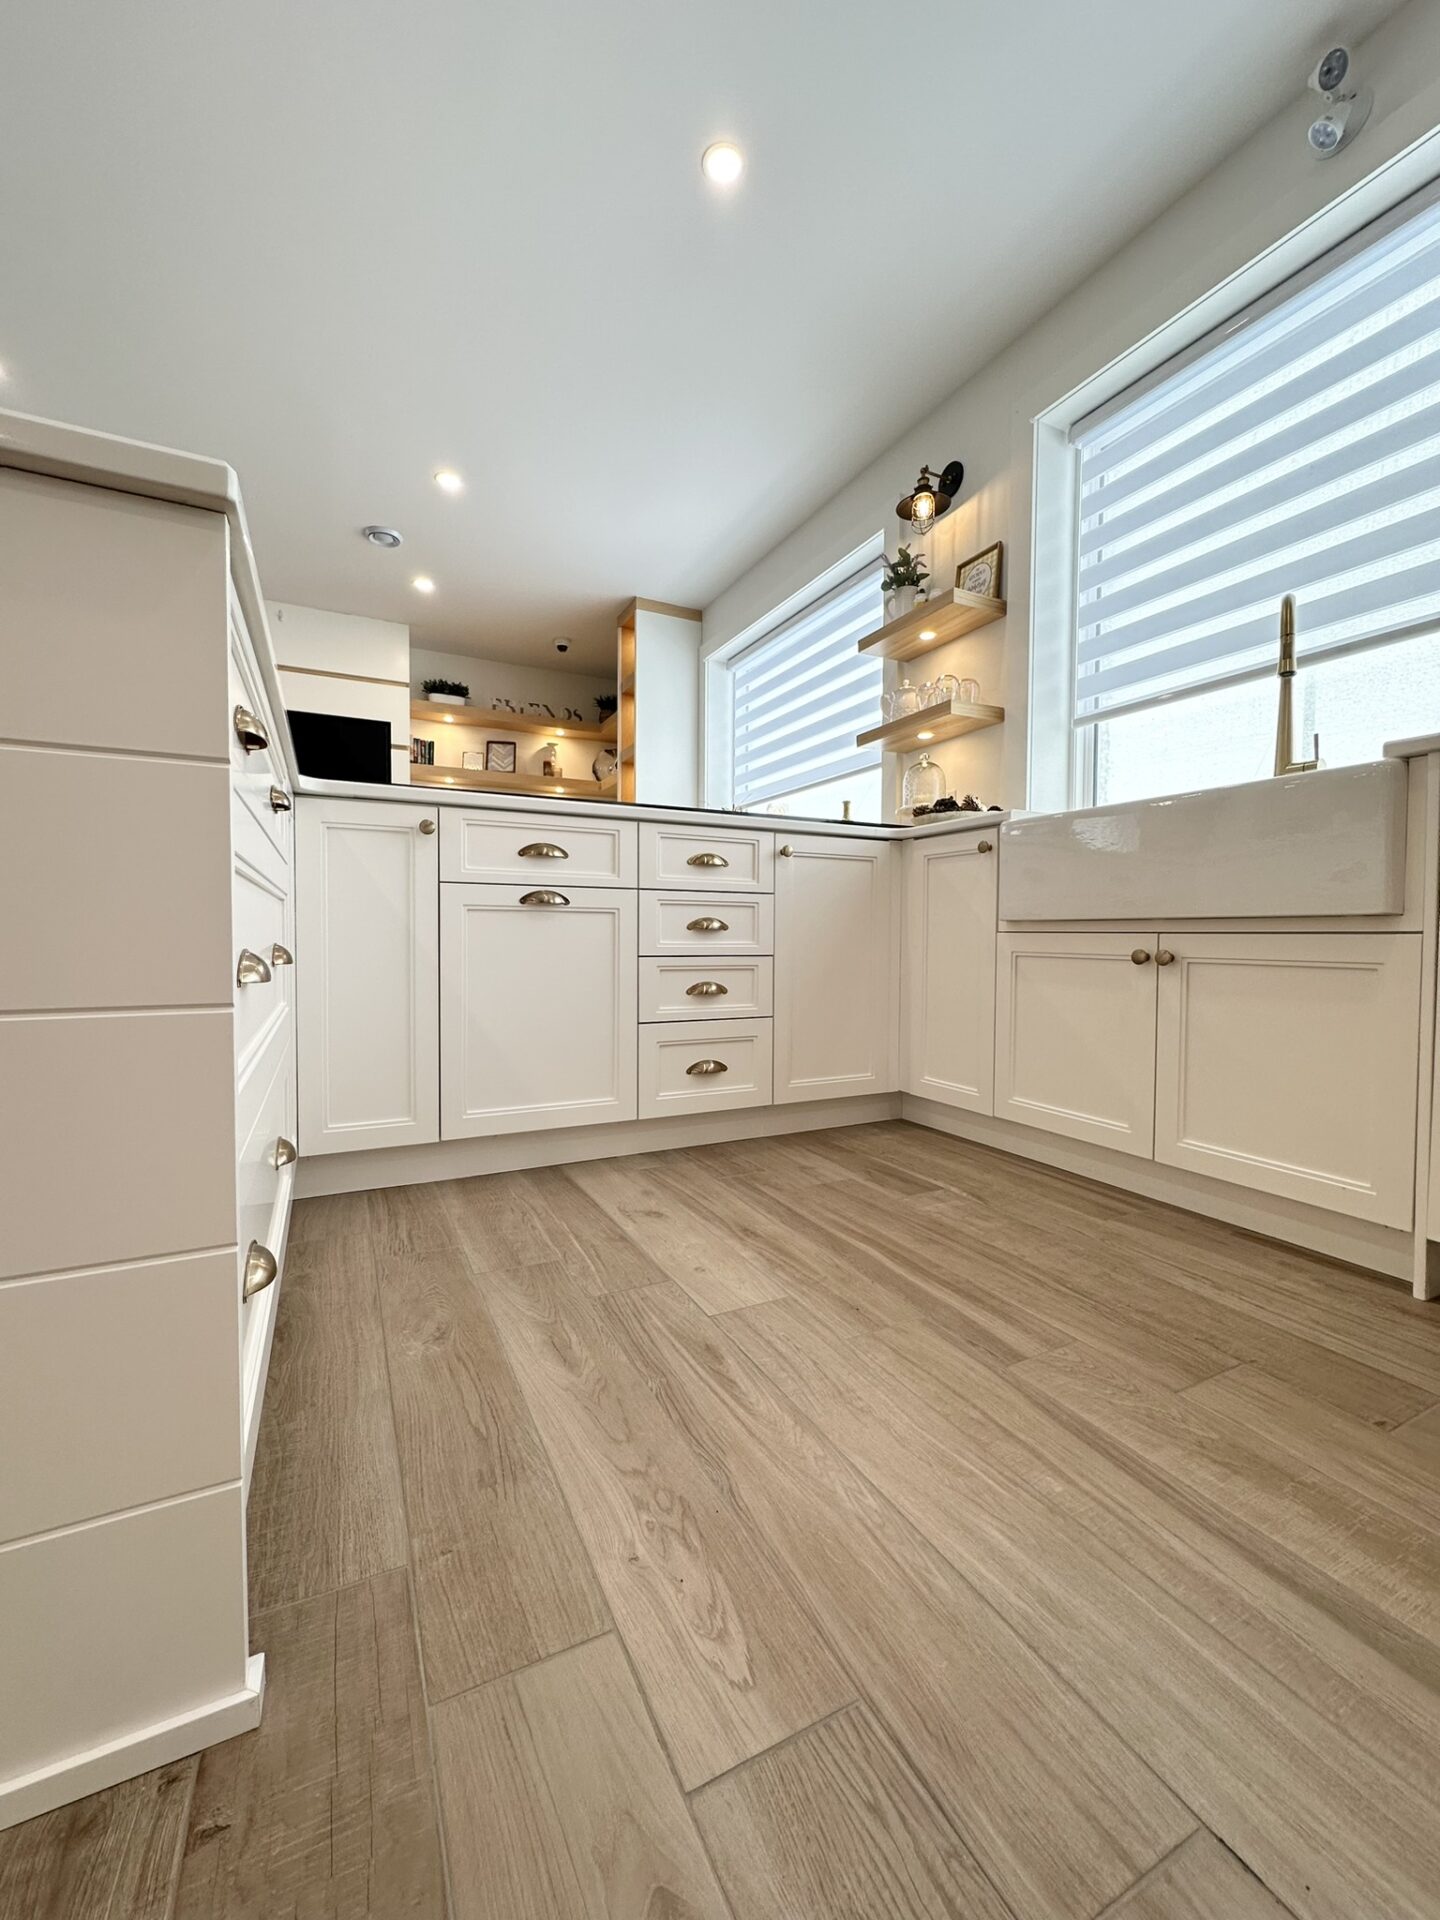 Bright kitchen interior with white cabinets, drawers with gold handles, wood flooring, and natural light coming through a window with blinds.